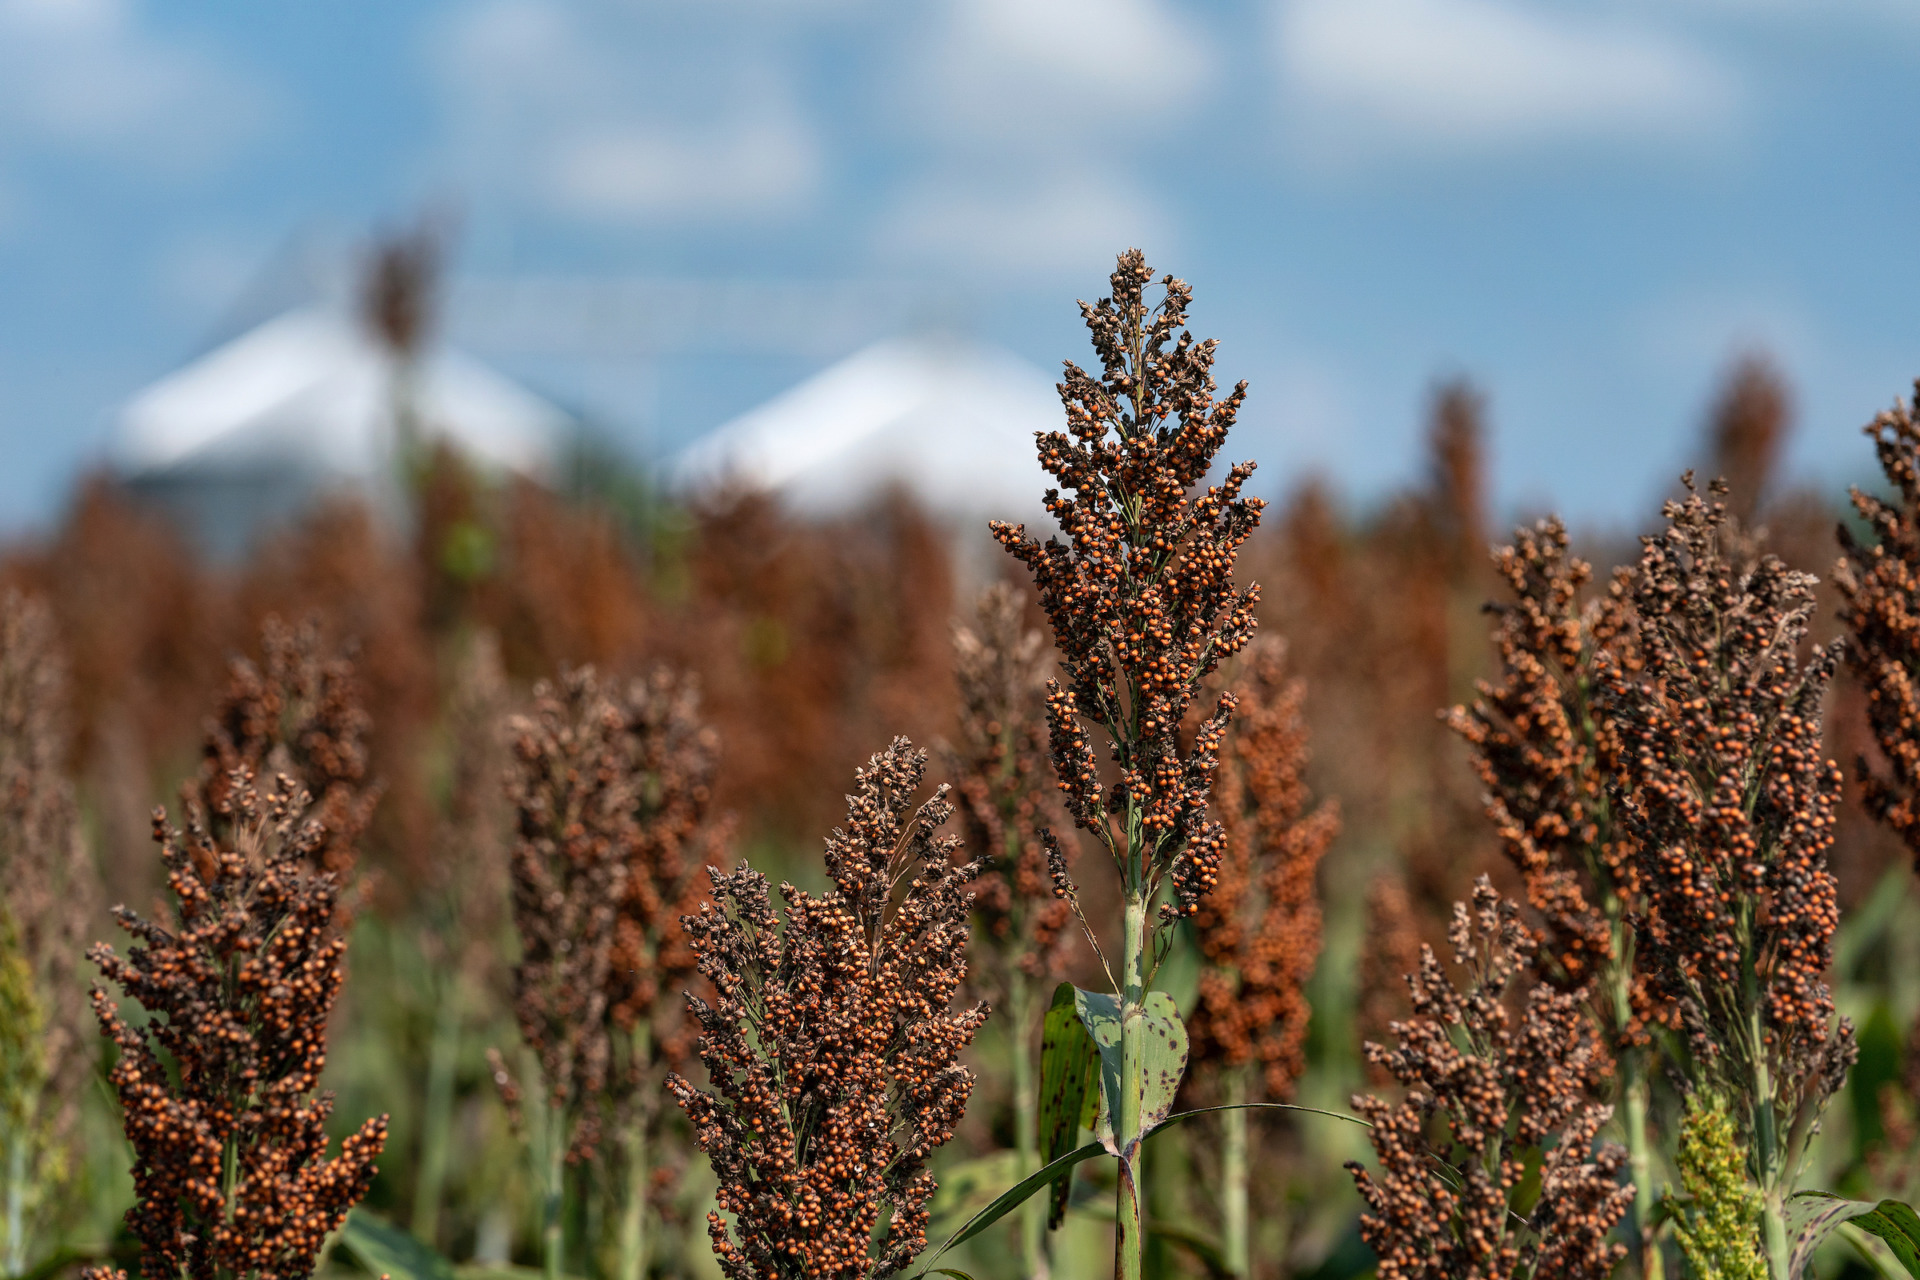 Winter garden row crops, such as sorghum, will be discussed during the Jan. 29 Winter Garden Row Crop Conference in Hondo. (Texas A&M AgriLife photo by Laura McKenzie)